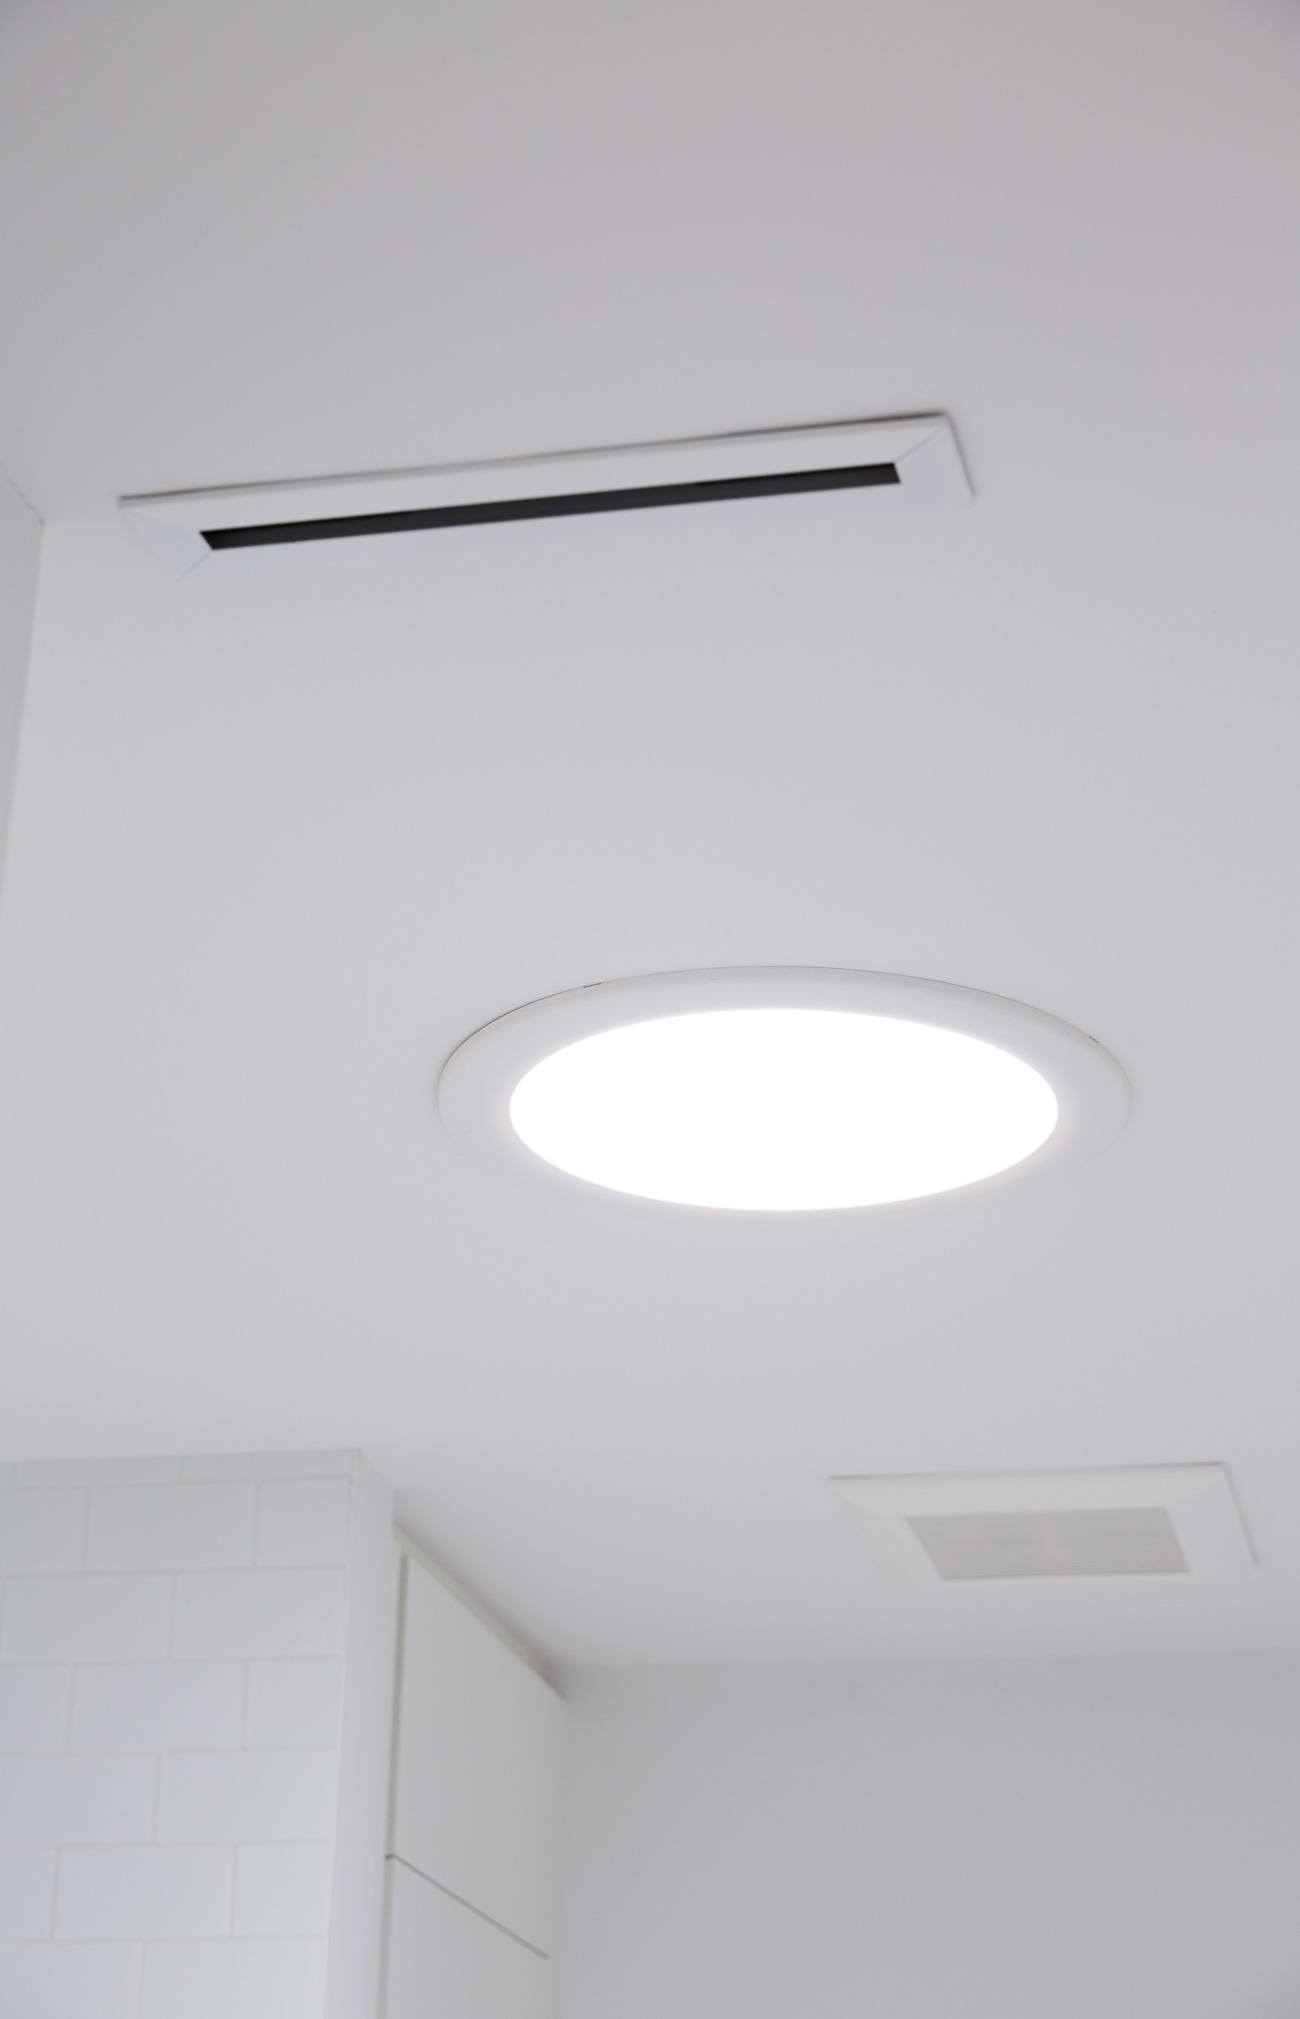 Velux sun tunnels bring ample natural light into the window-less bathrooms and master closet.